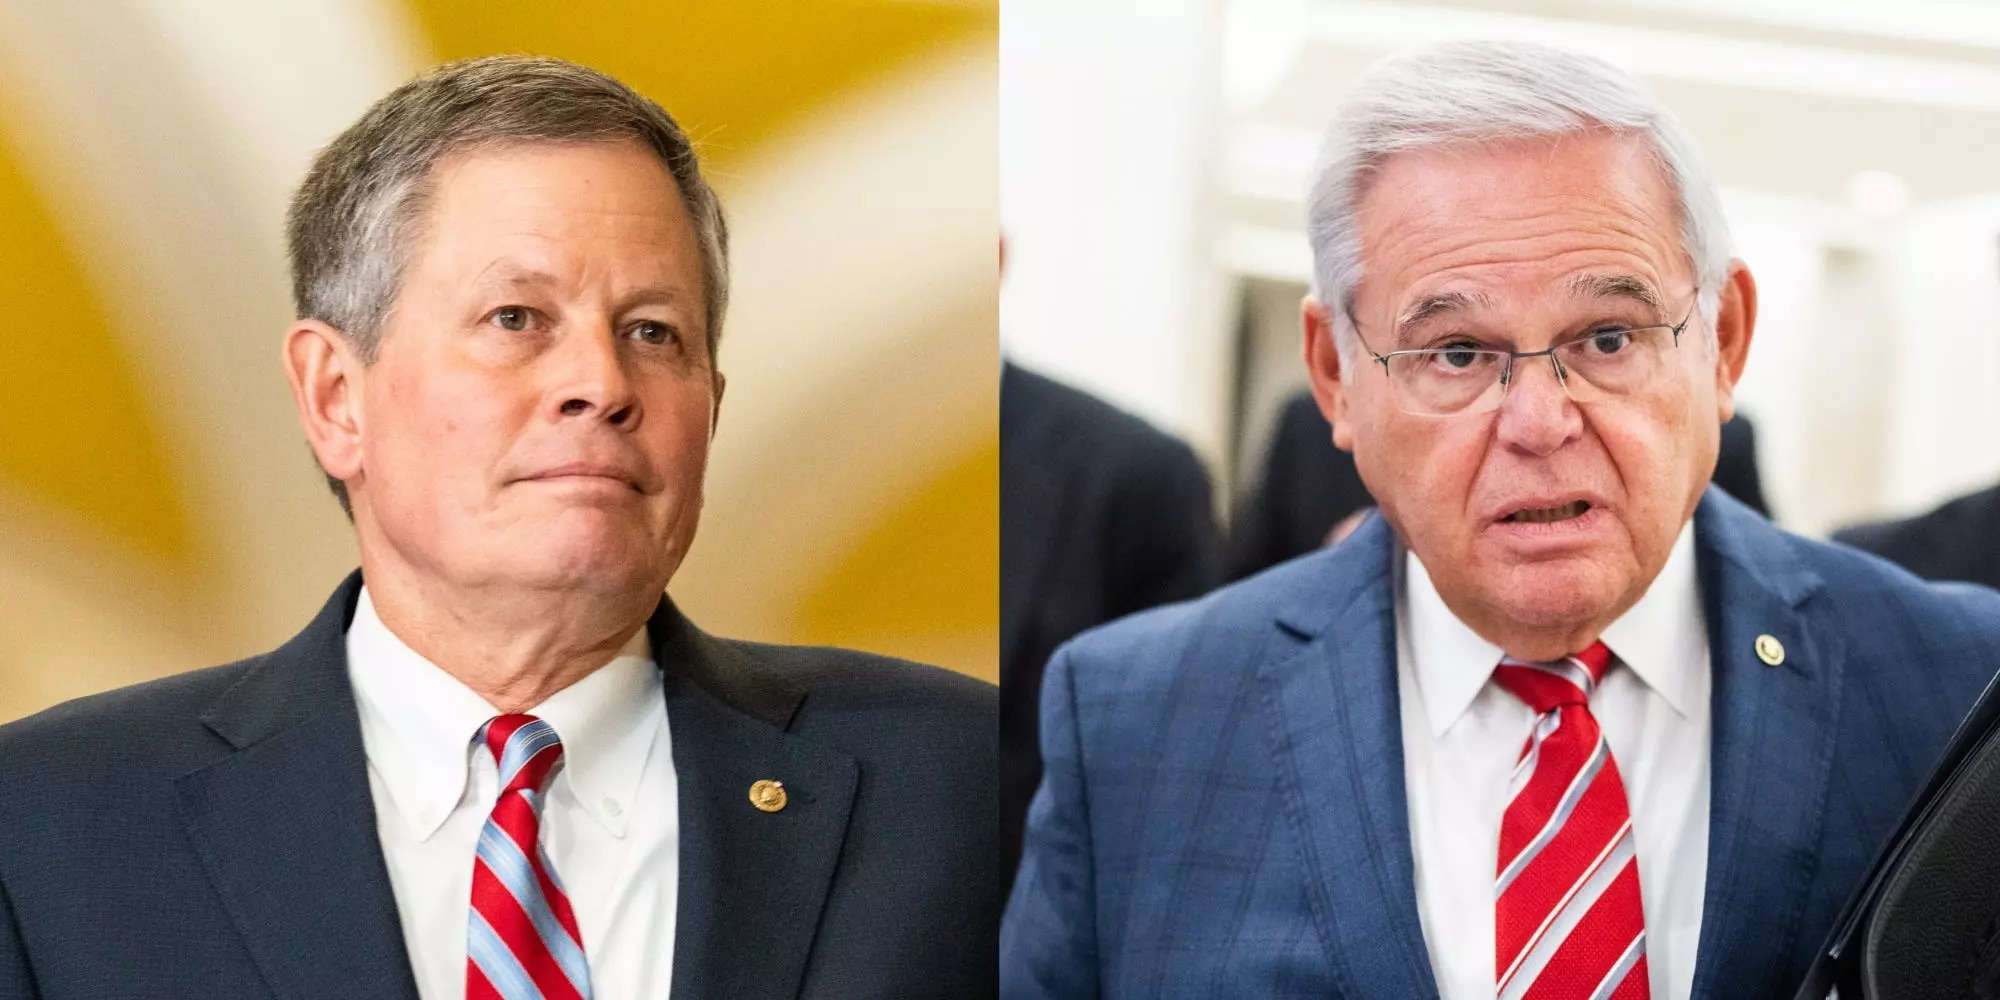 Menendez Indictment: Why Gold Is an Eye-Popping Part of the